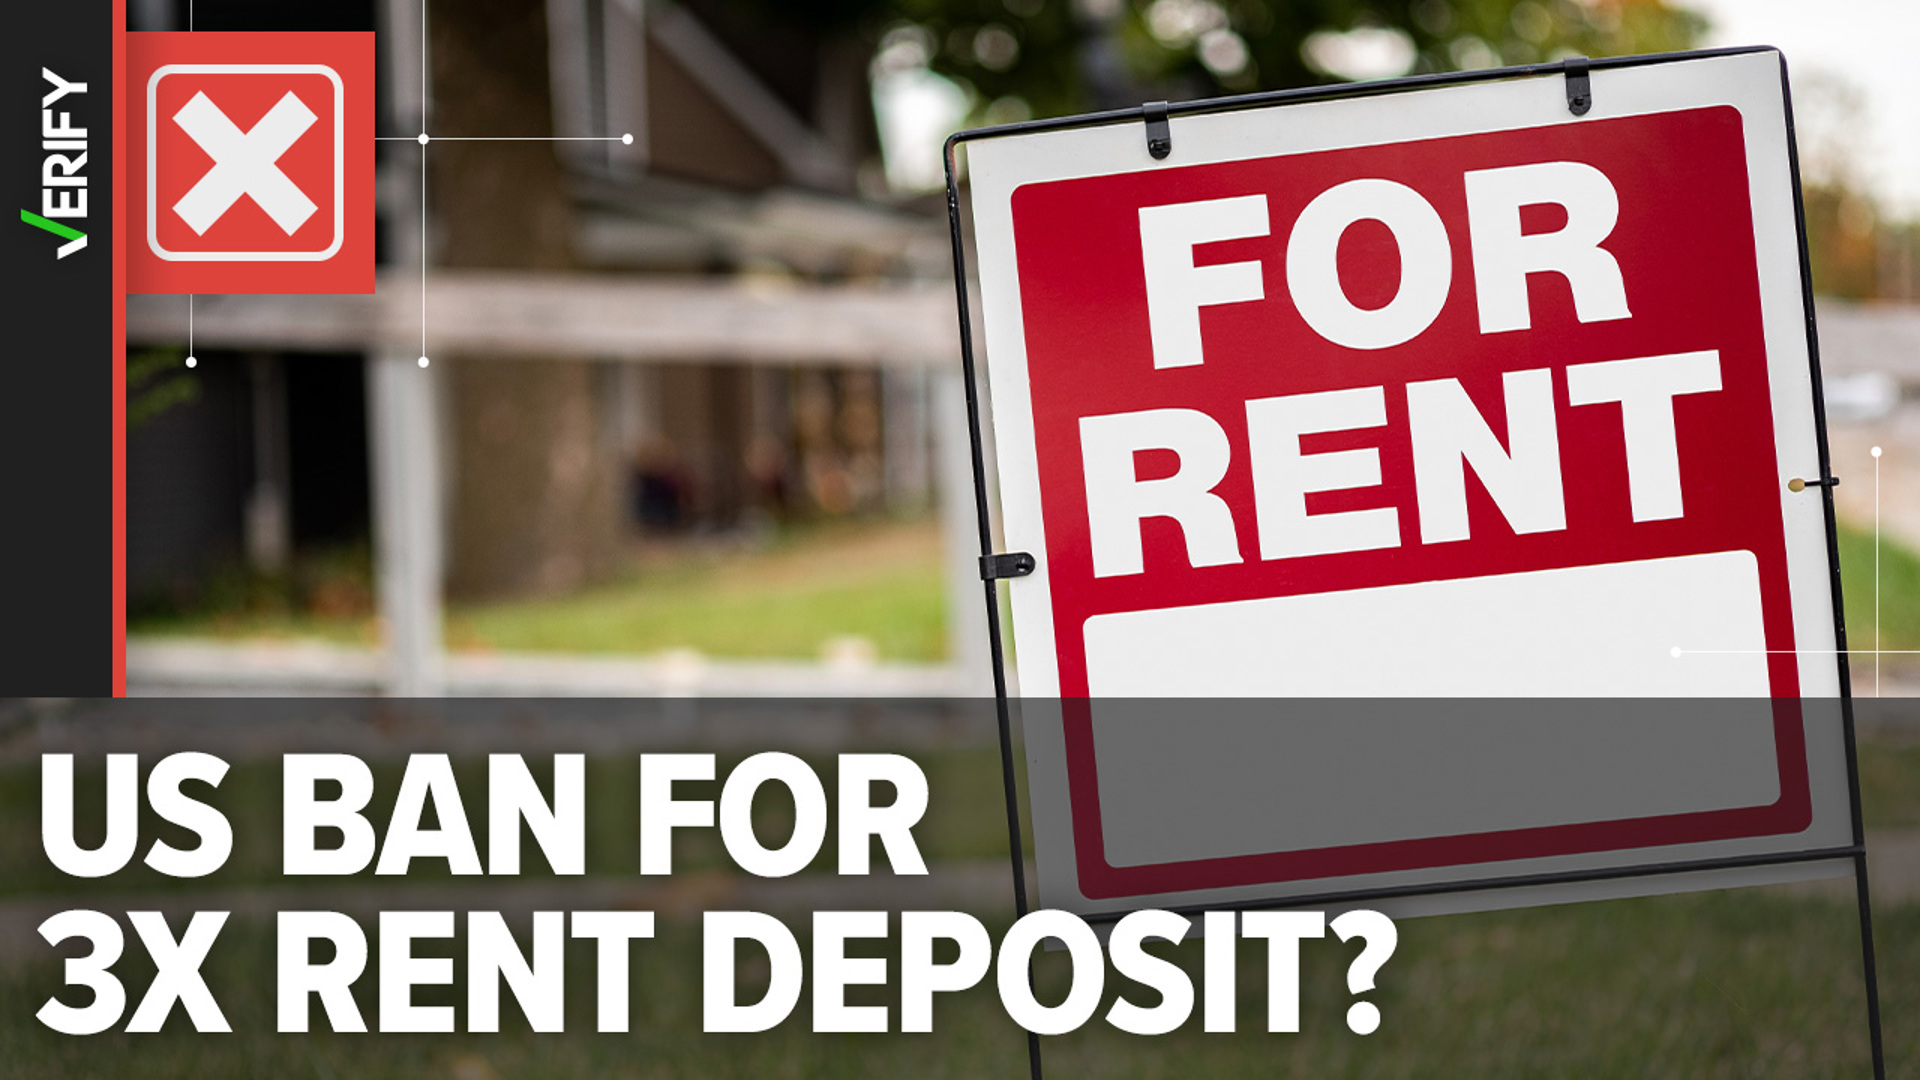 A California law limits security deposits to one month’s rent beginning July 1 for most rentals. This law isn’t nationwide, although many states have similar laws.